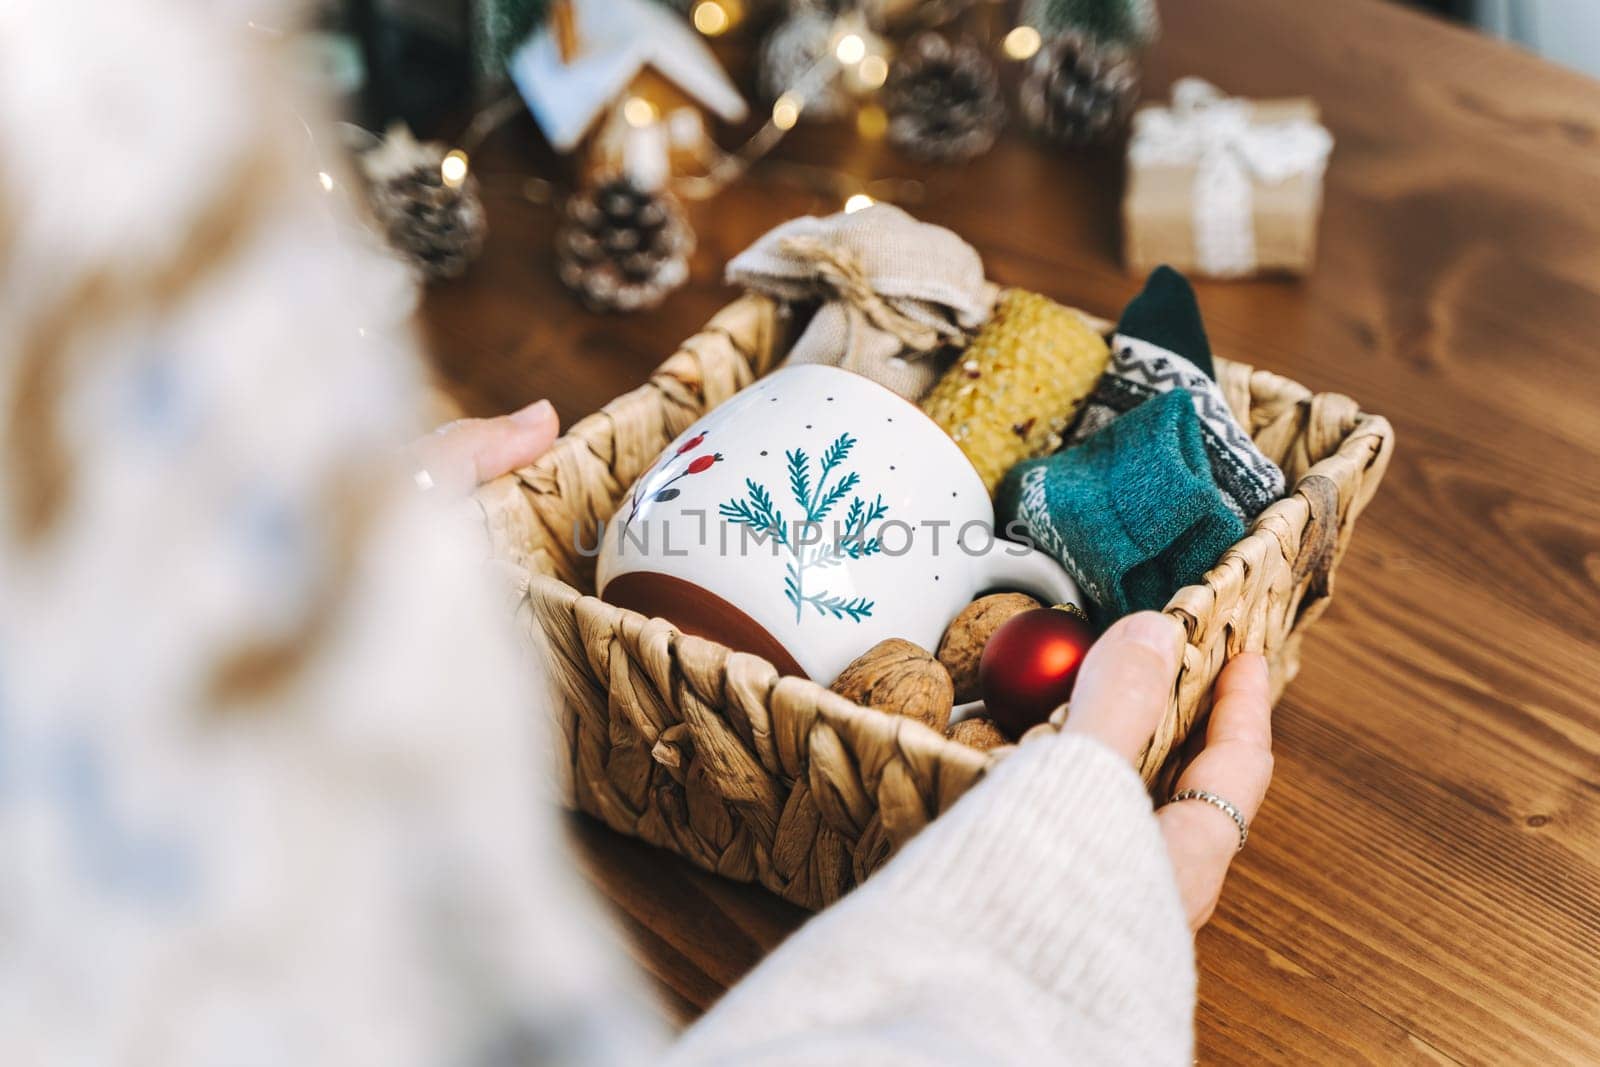 Woman s hands wrapping Christmas eco gift wicker basket, close up. Unprepared presents on wooden table with natural decor elements and items Christmas packing Concept by Ostanina